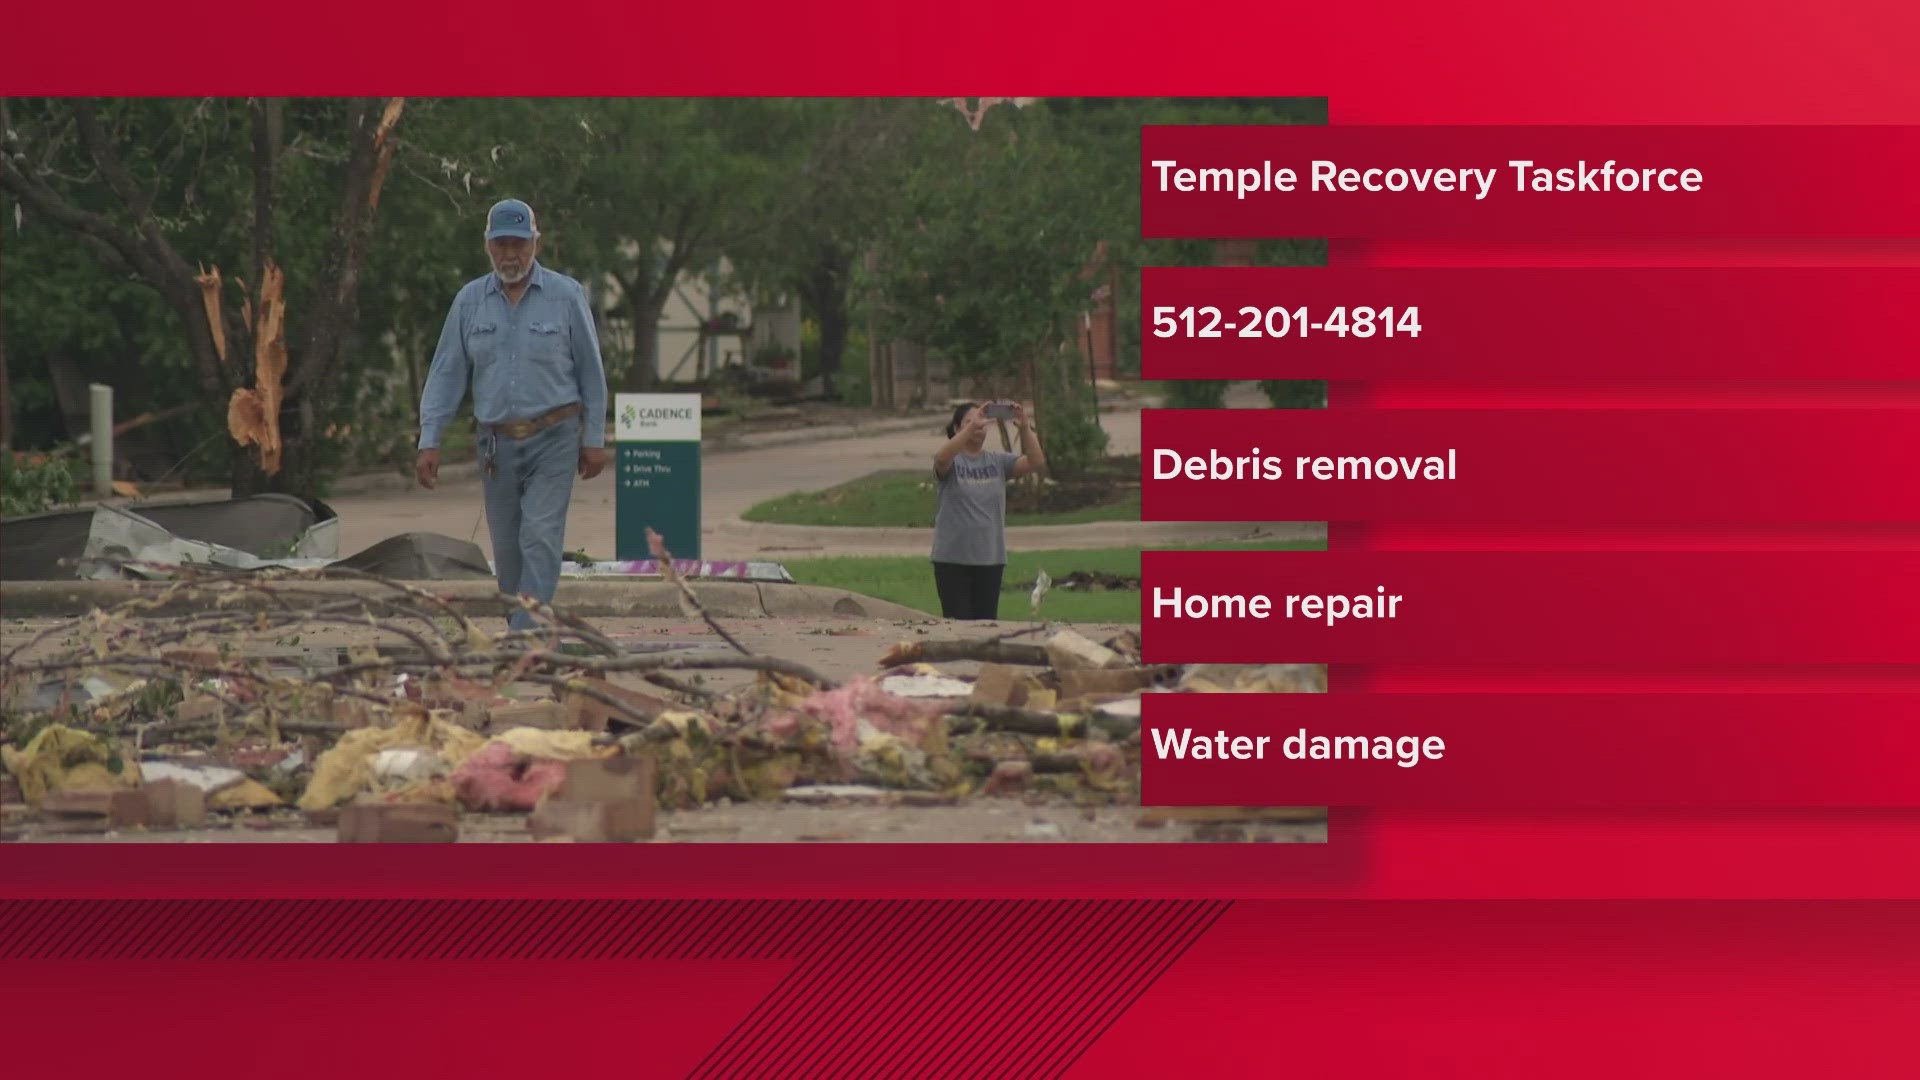 The City of Temple released information on where you can get food, water, hygiene products and shelter.